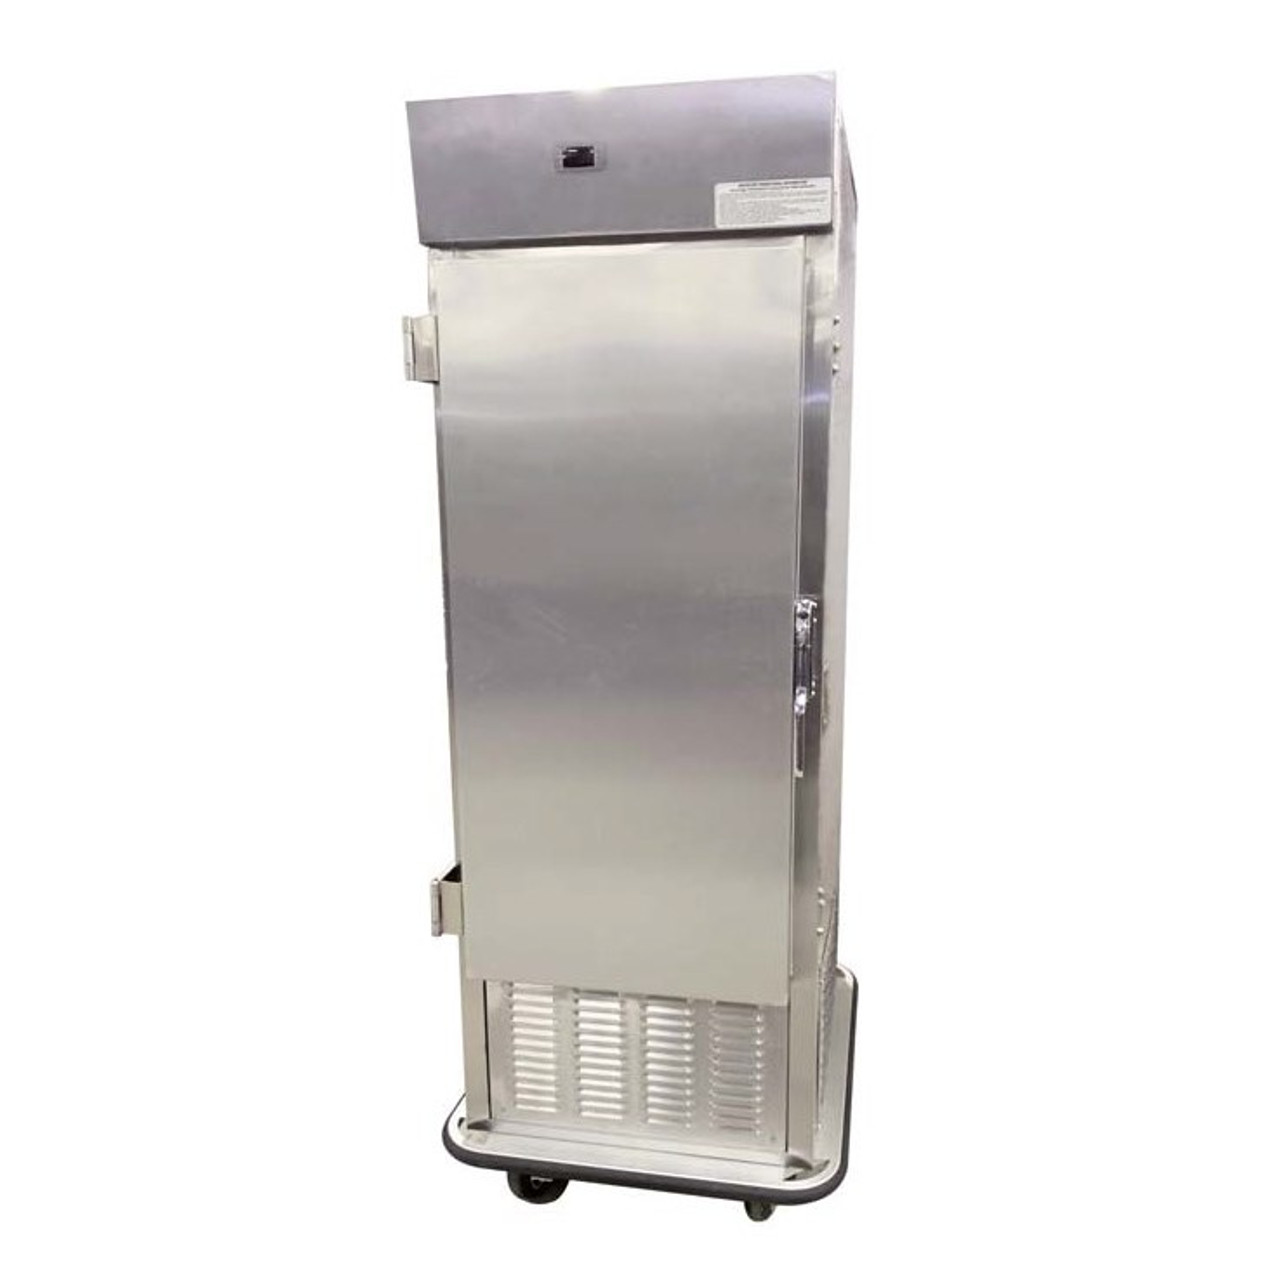 Air-Screen Trayline Refrigerated Cabinet, mobile, insulated, bottom-mounted refrigerator, (15) 18"x 26" pans, fixed slides, 3" centers, (1) solid hinged door, stainless steel construction, 6" swivel casters (2 with brakes), 1 HP, cULus, NSF